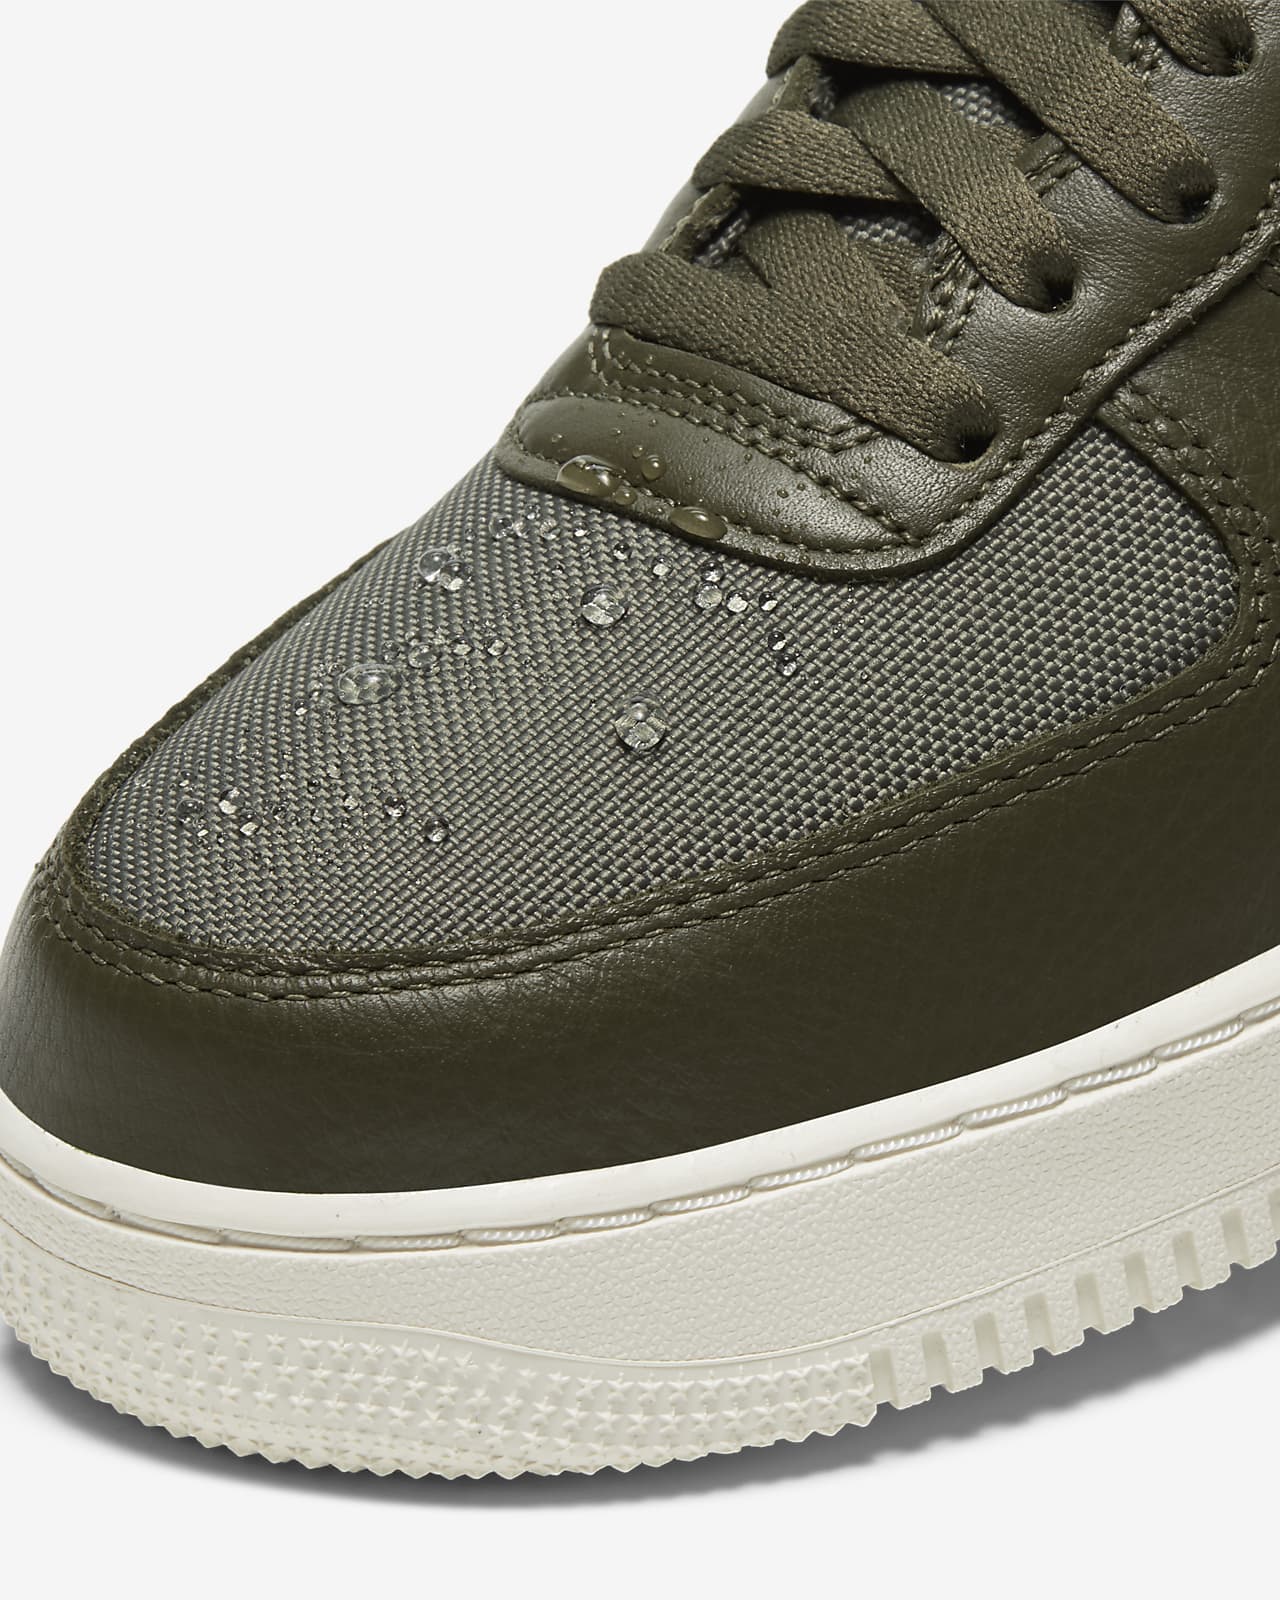 air force one nike hombre